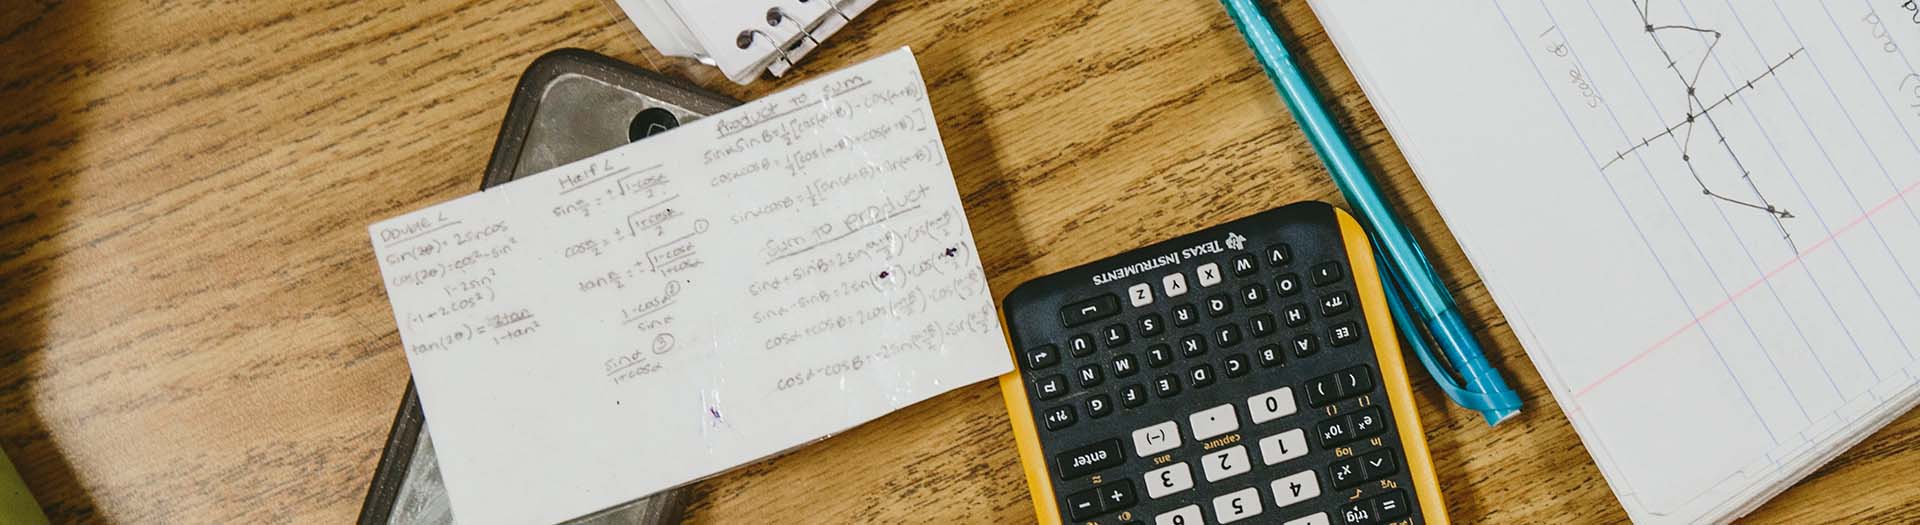 Calculator, pencil, pad of paper and notecard on desk.